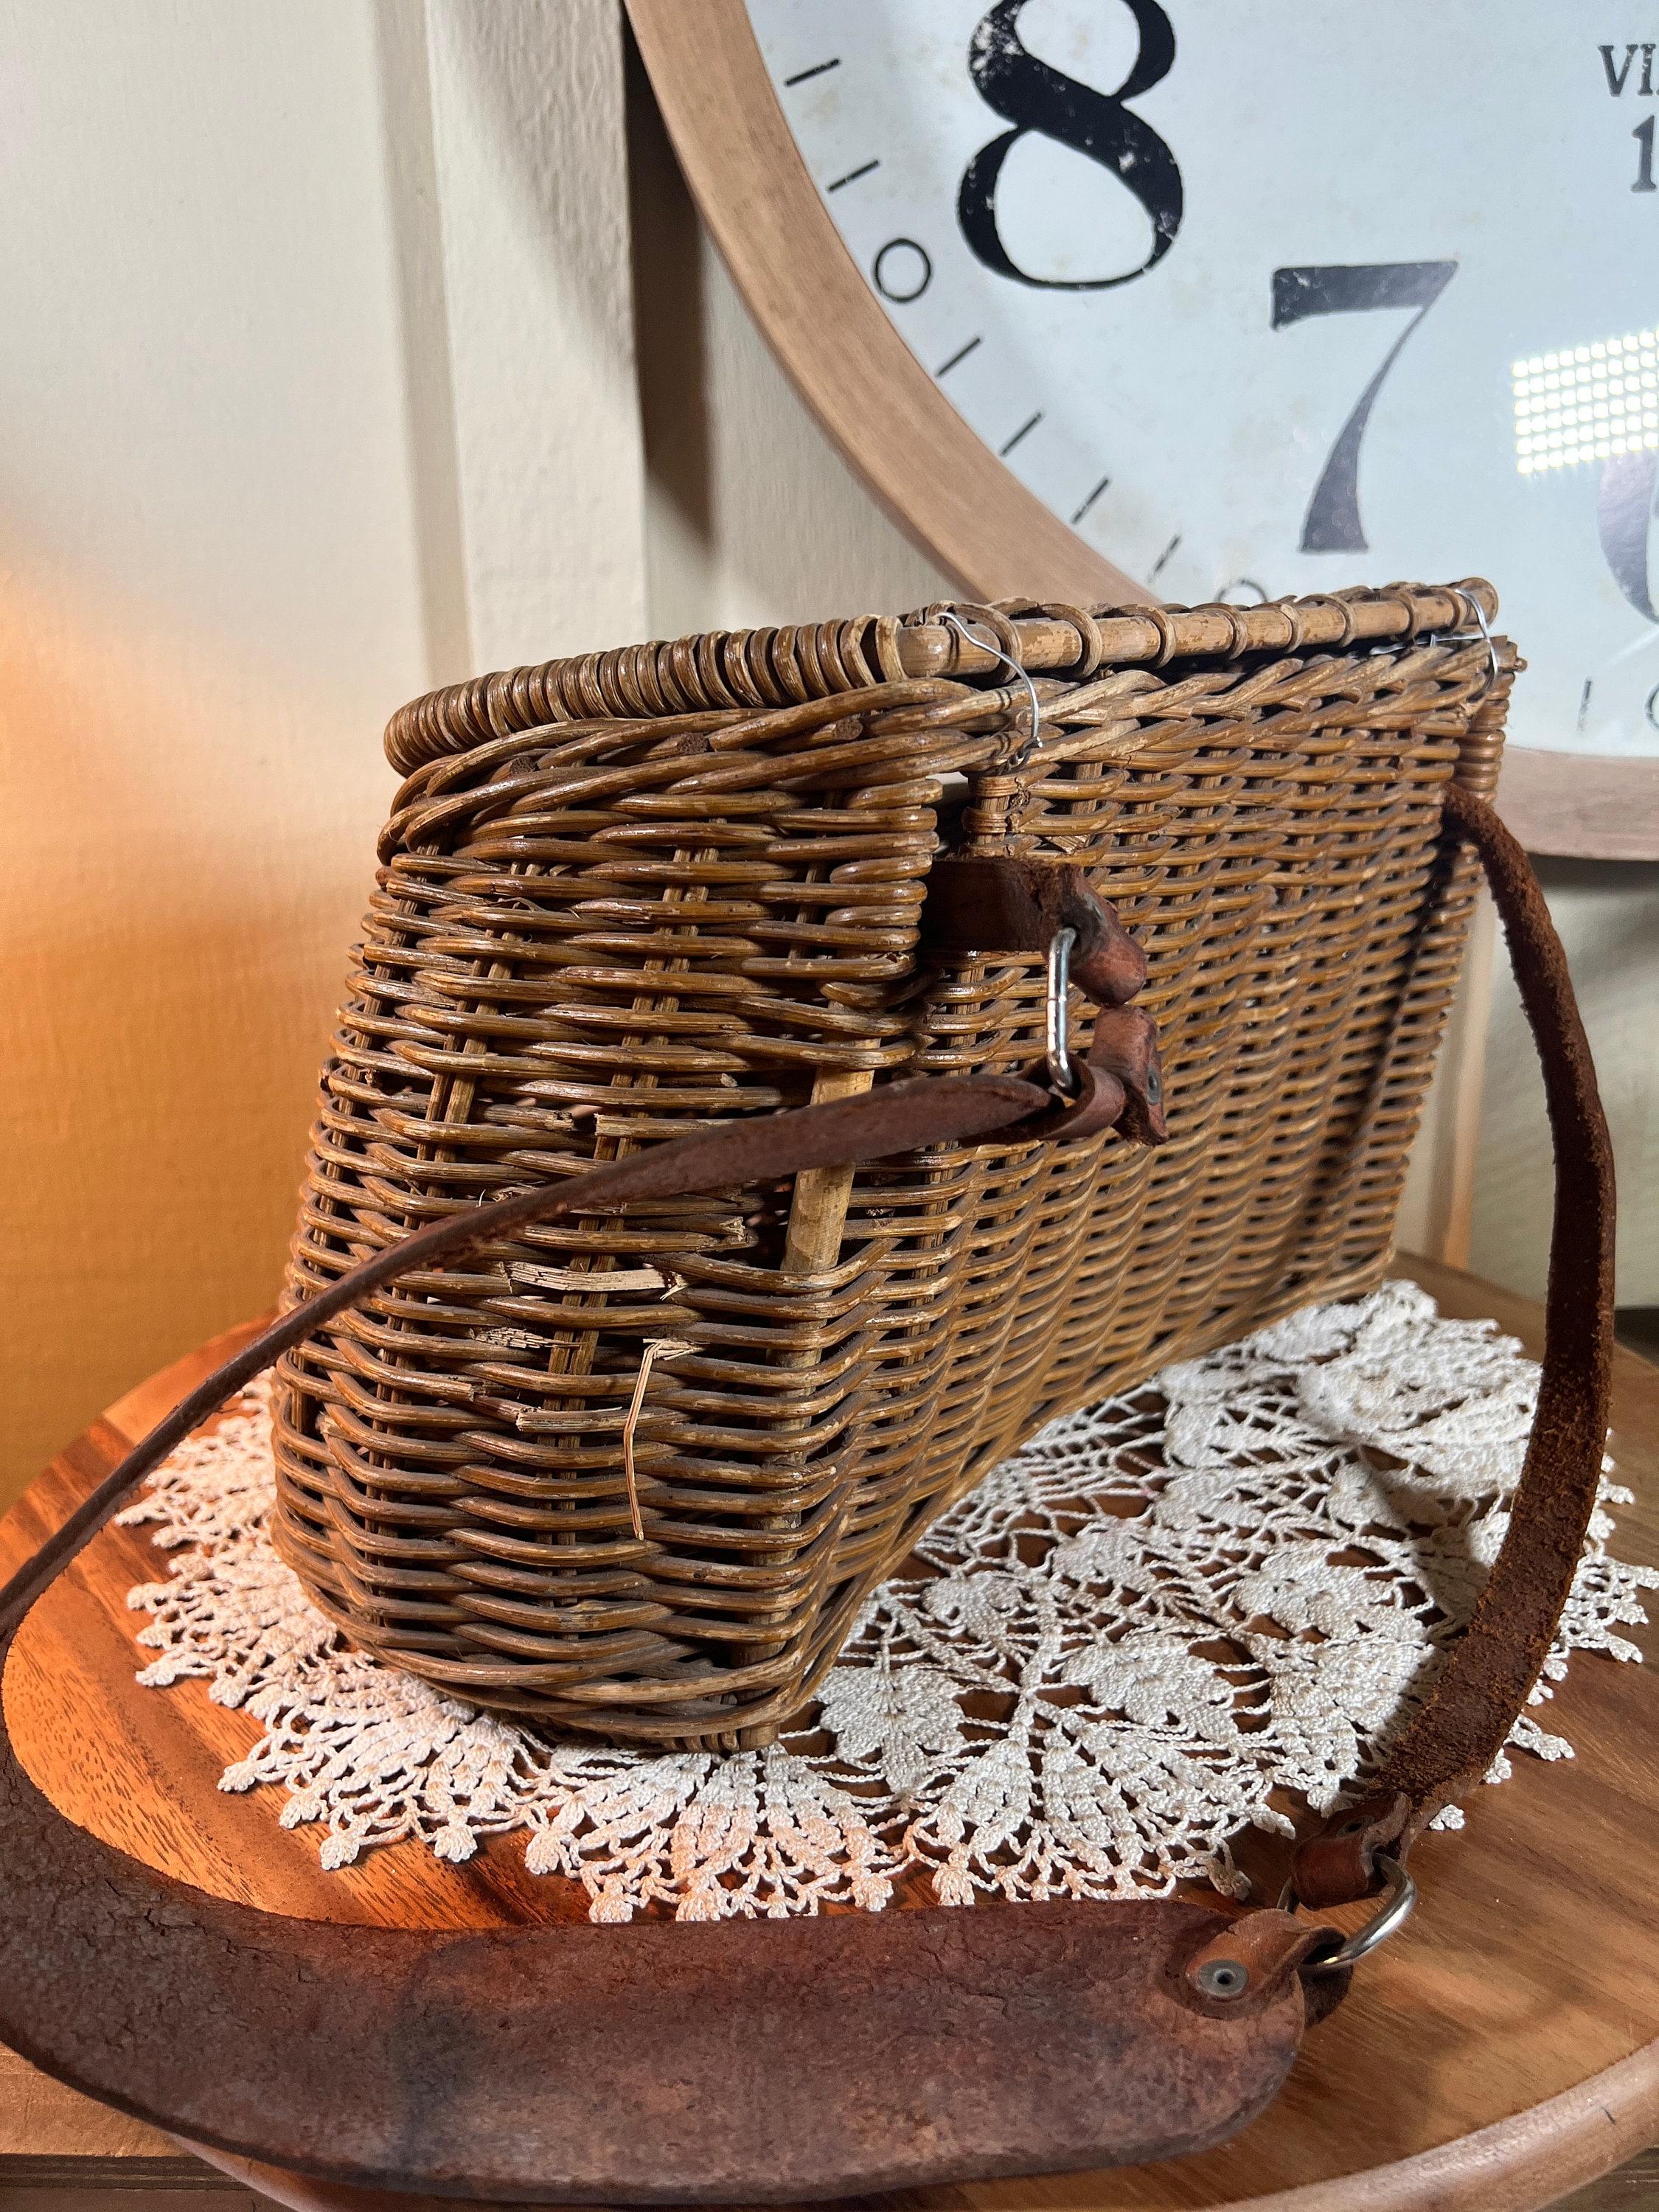 Antique, Vintage, Wicker, Fly Fishing, Trout, Fish, Creel, Basket